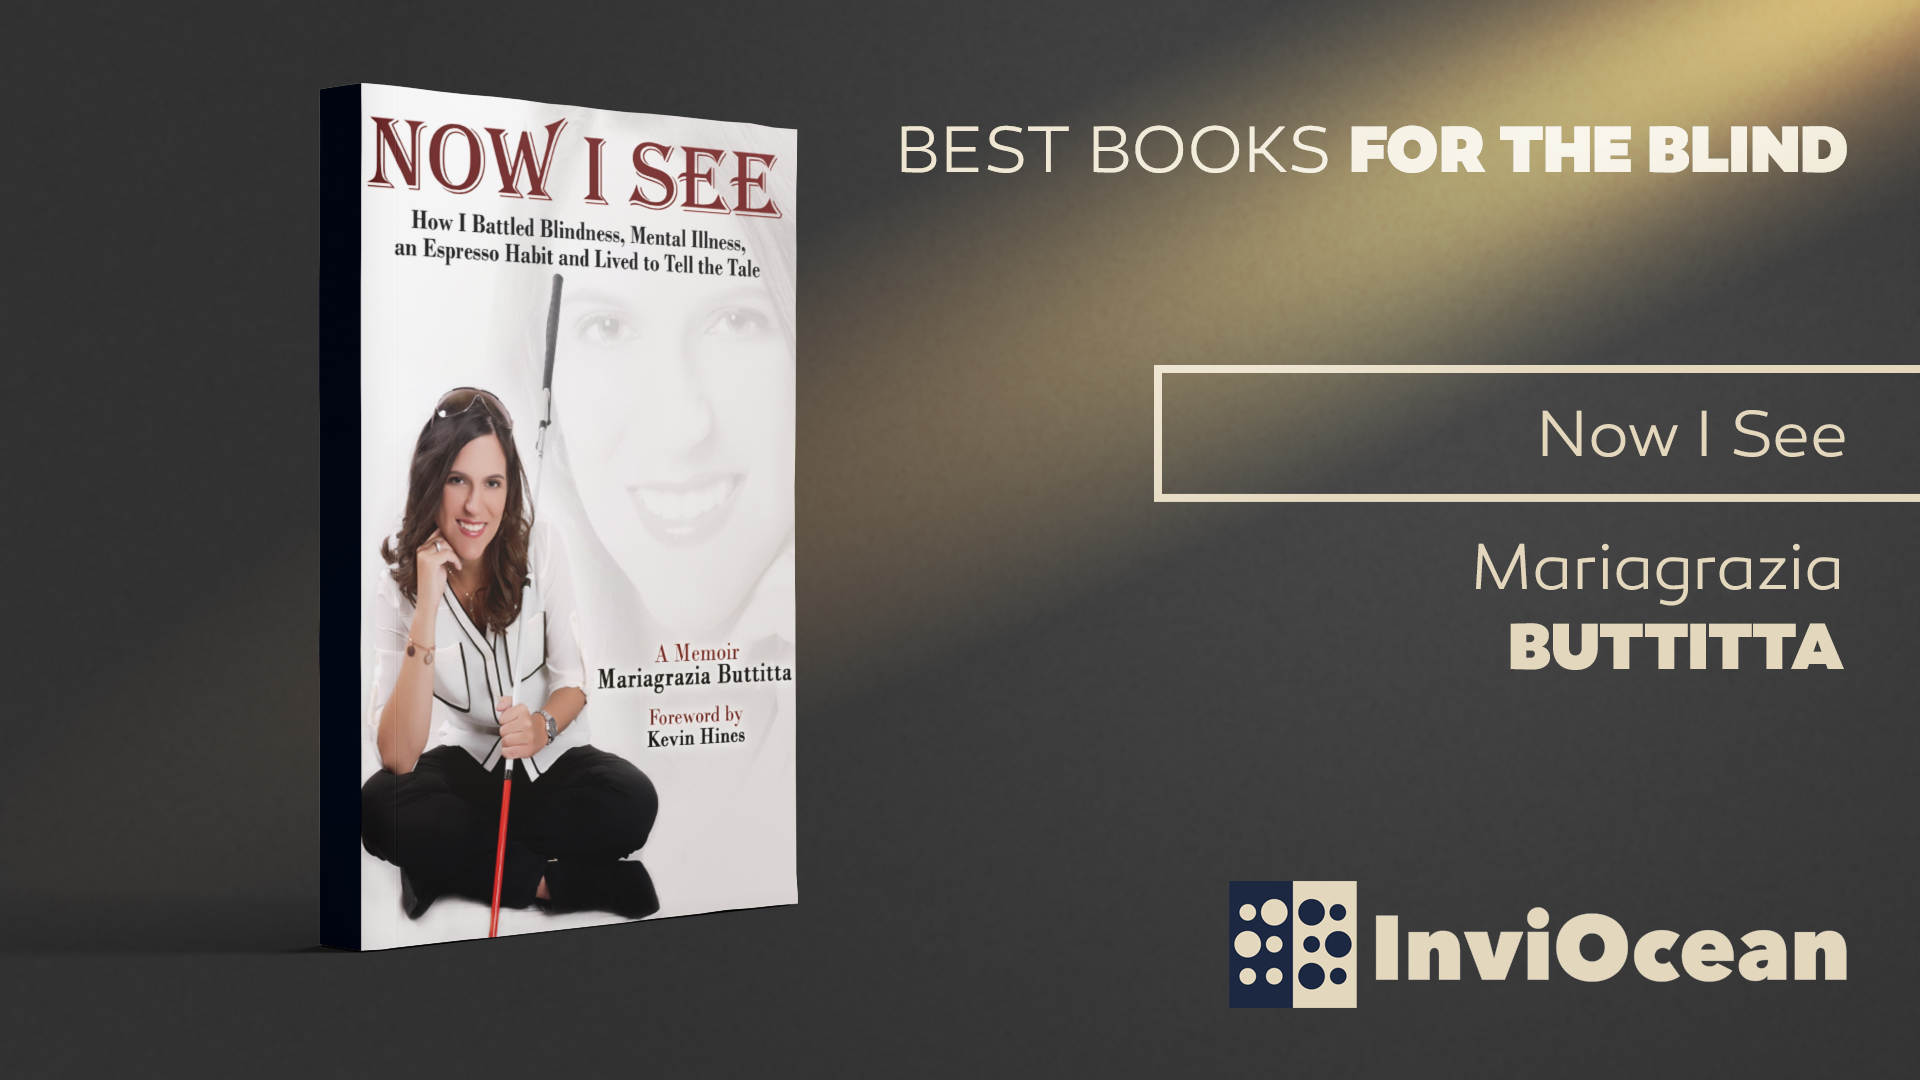 Now I See: How I Battled Blindness, Mental Illness, an Espresso Habit and Lived to Tell the Tale by Mariagrazia Buttitta